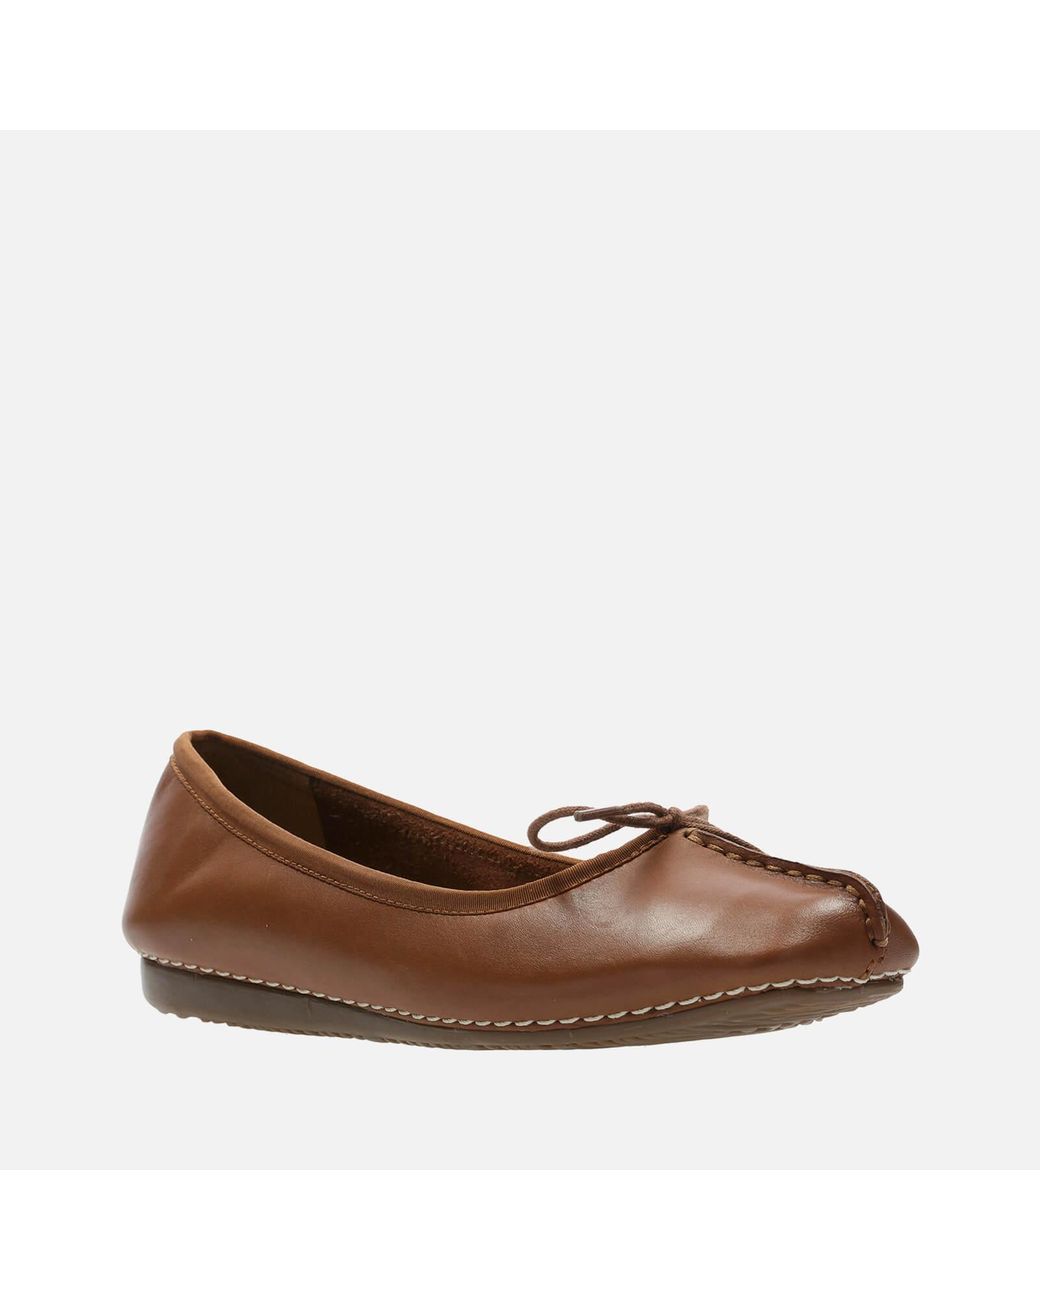 Clarks Freckle Ice Leather Ballet Flats in Brown | Lyst